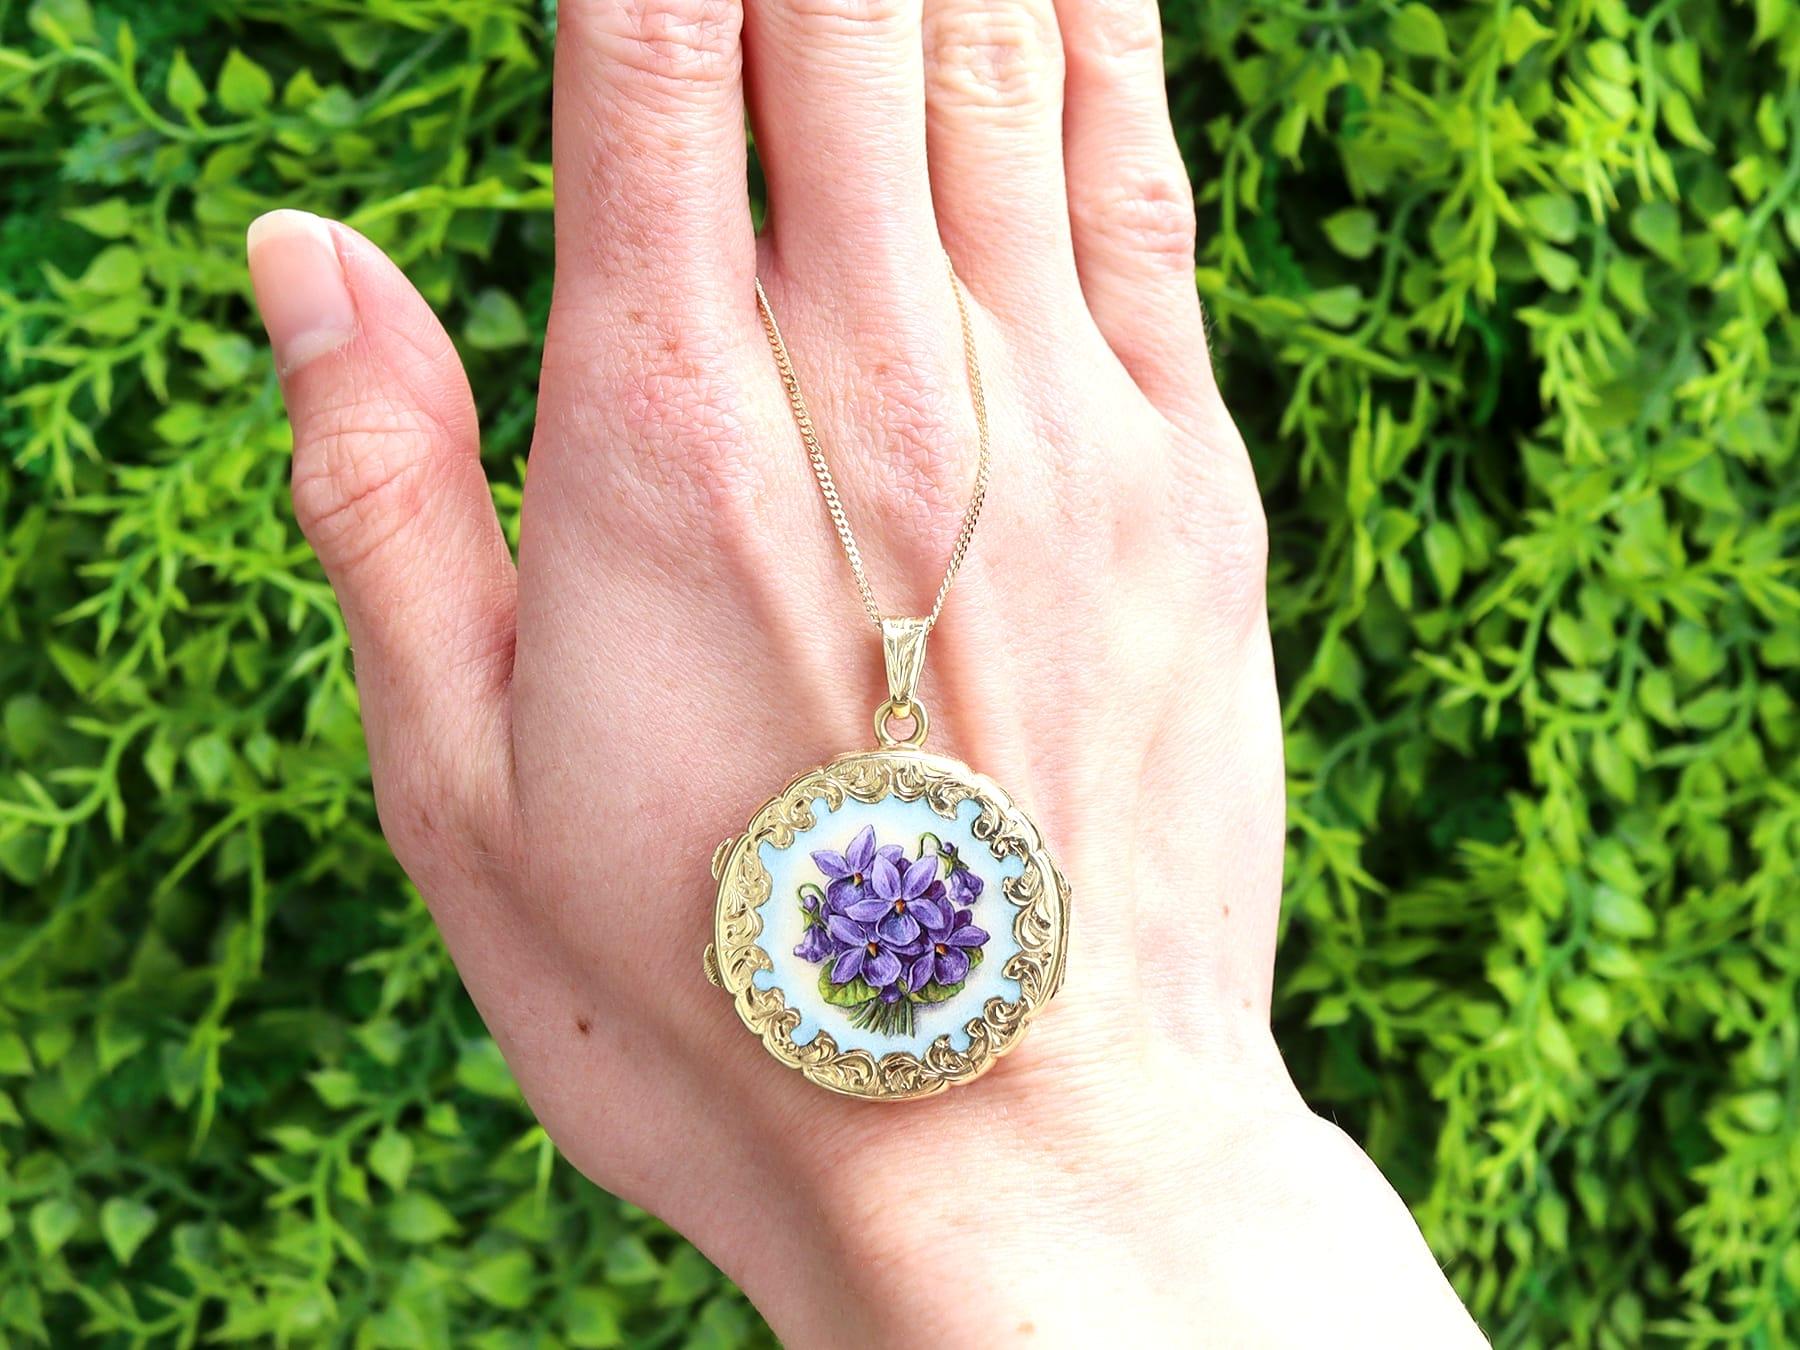 An exceptional, fine and impressive antique enamel and 14 karat yellow gold pendant/locket; part of our antique jewellery collections.

This exceptional, fine and impressive antique locket has been crafted in 14k yellow gold.

The locket has a